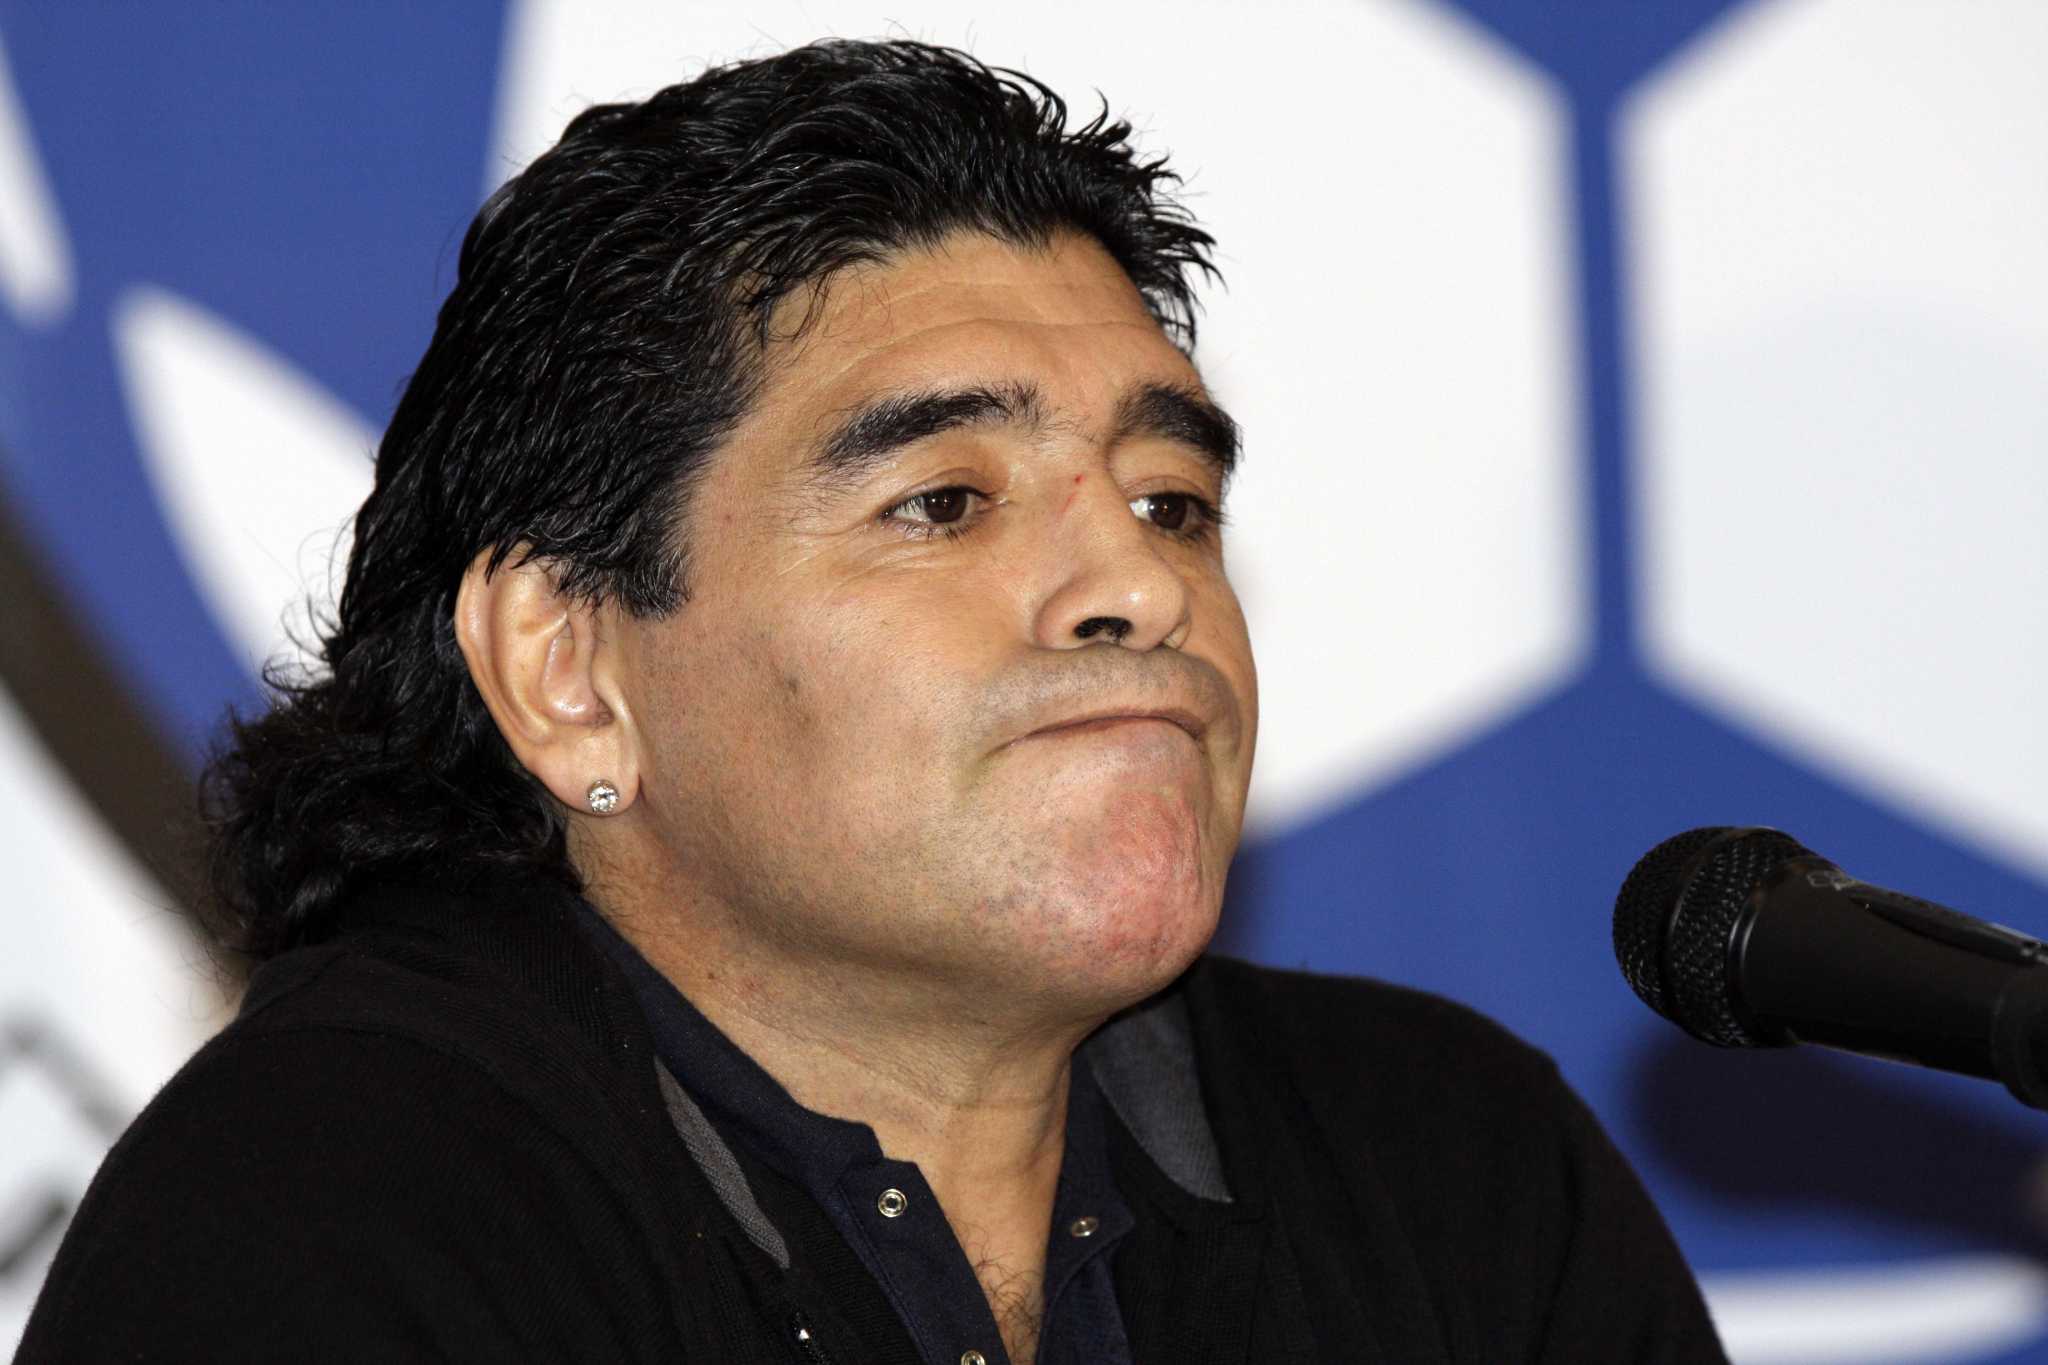 Maradona's children want to transfer his body from cemetery to a mausoleum